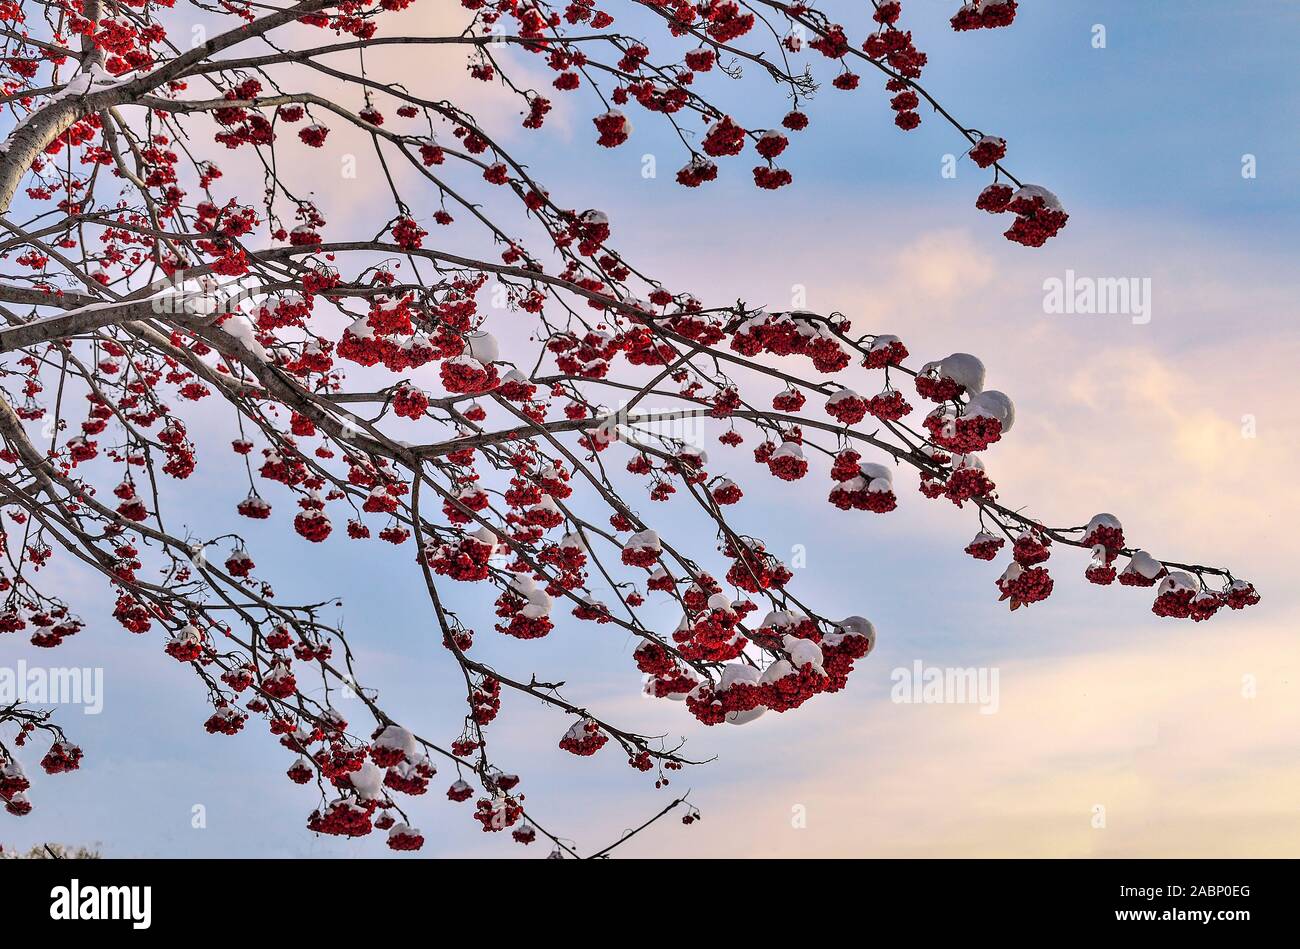 Snow covered rowan tree branches with red berries - winter landscape on sunset or sunrise sky background. Bright decoration of white winter nature and Stock Photo